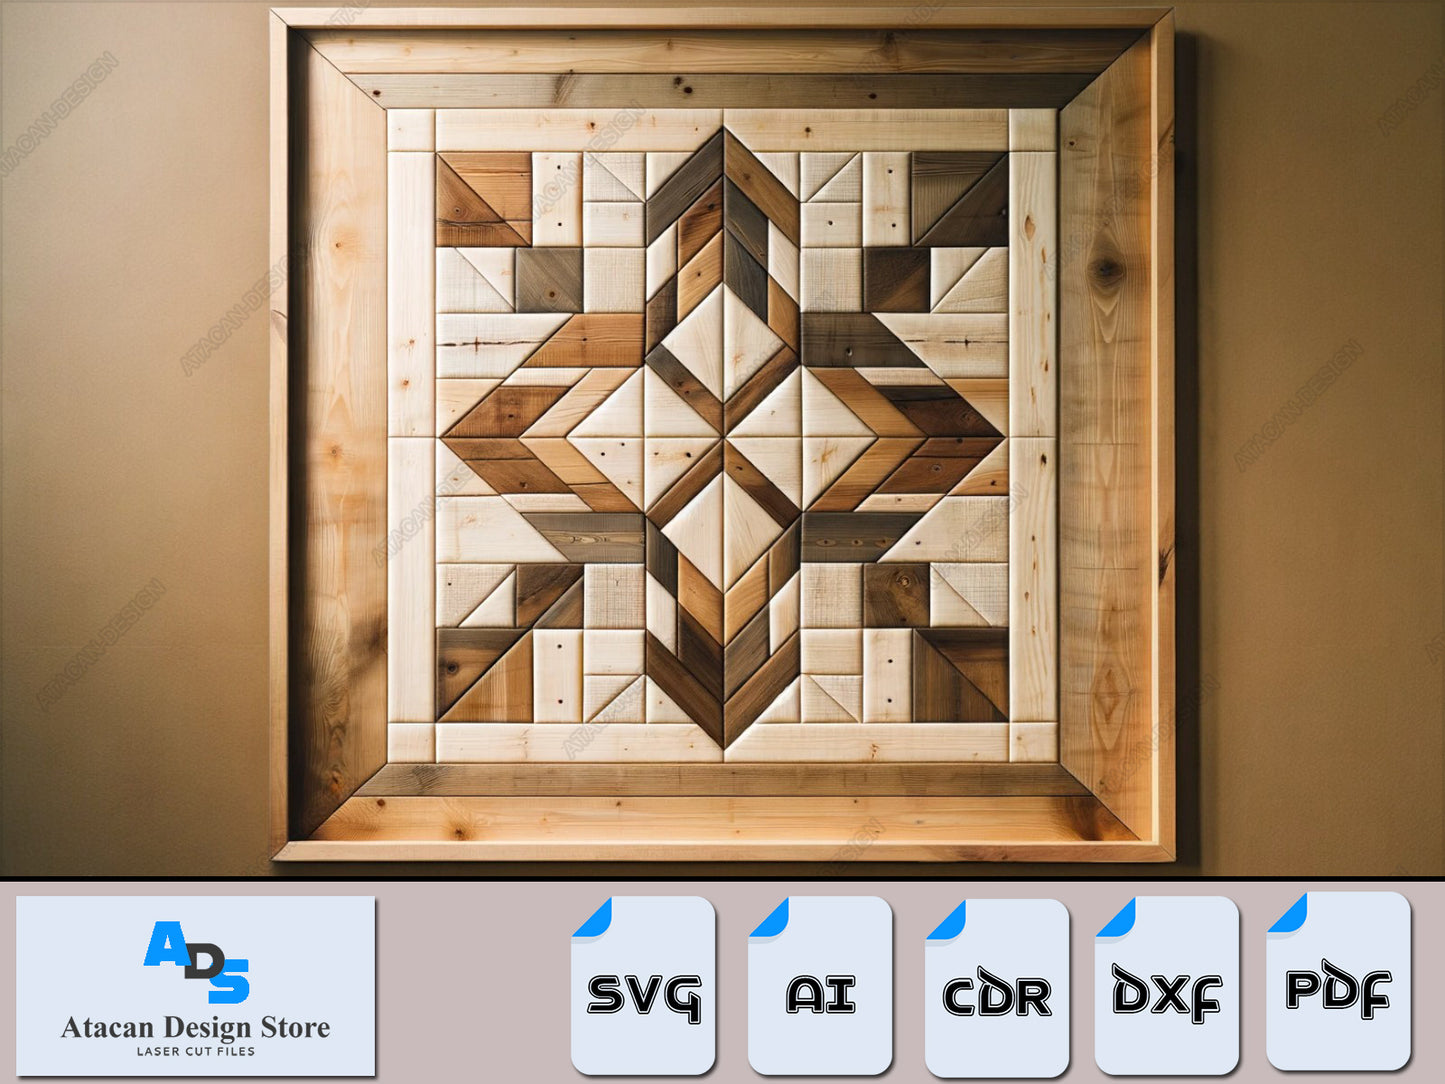 Rustic Charm Barn Quilt Patterns Bundle - Premium Svg, Dxf ,Pdf, Ai, Cdr Files for Laser Cutting 403